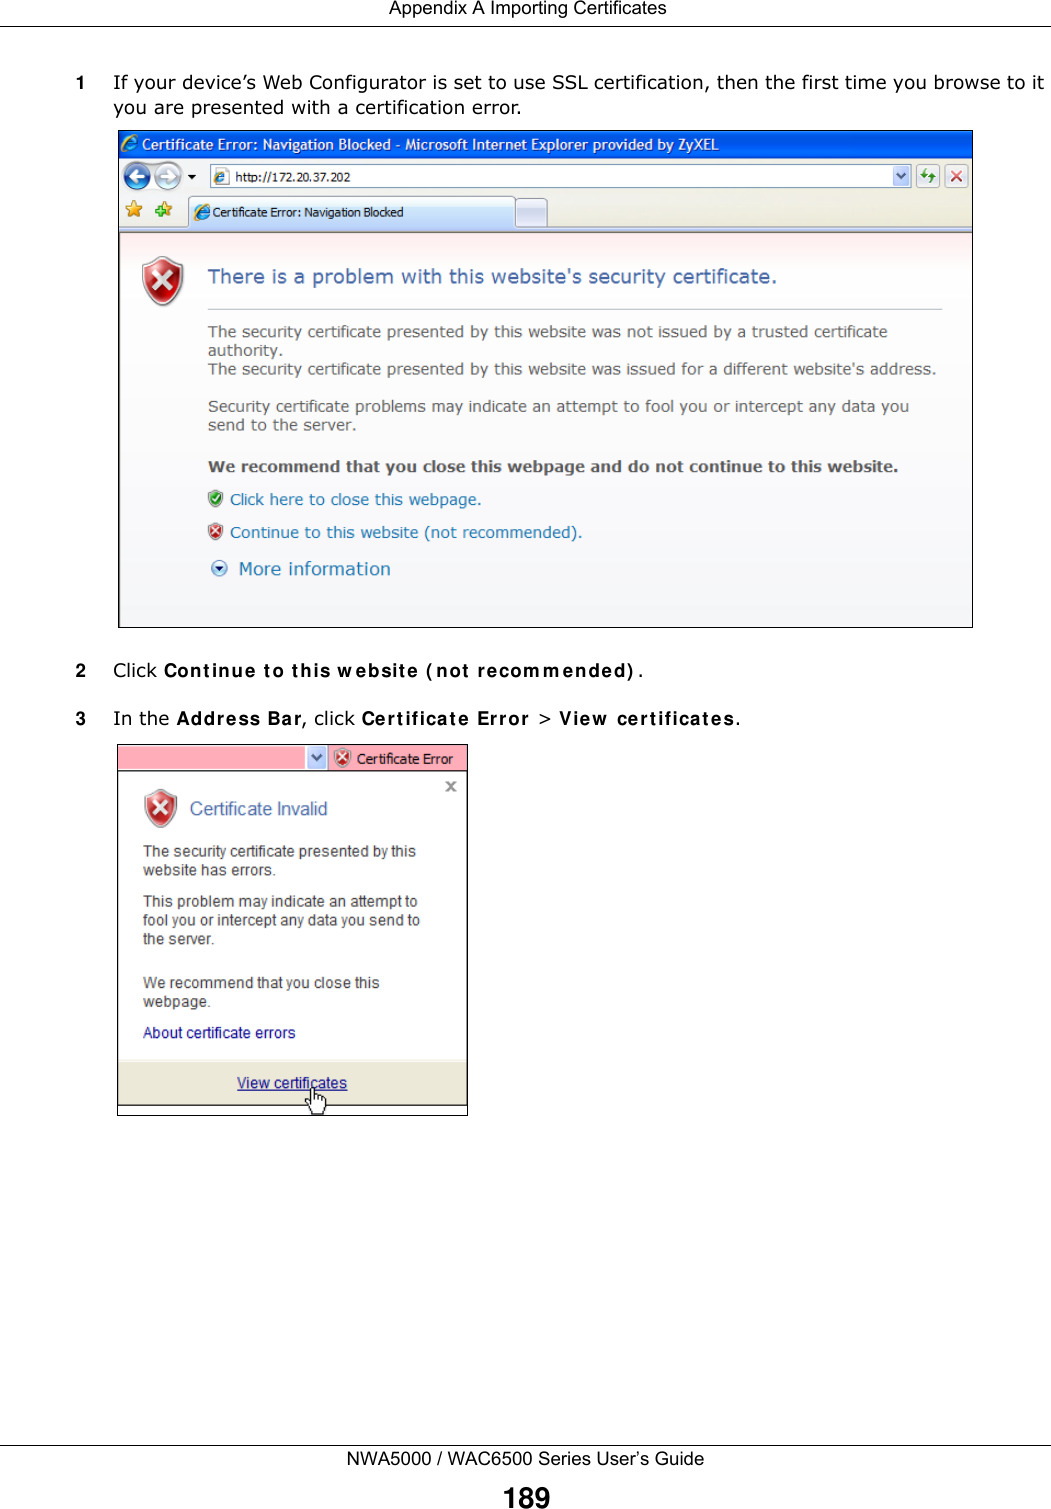  Appendix A Importing CertificatesNWA5000 / WAC6500 Series User’s Guide1891If your device’s Web Configurator is set to use SSL certification, then the first time you browse to it you are presented with a certification error.2Click Cont in ue to t his w e bsite  ( n ot recom m e nded) .3In the Addre ss Ba r, click Ce rt ificat e Er ror &gt; View  ce rt ifica t es.